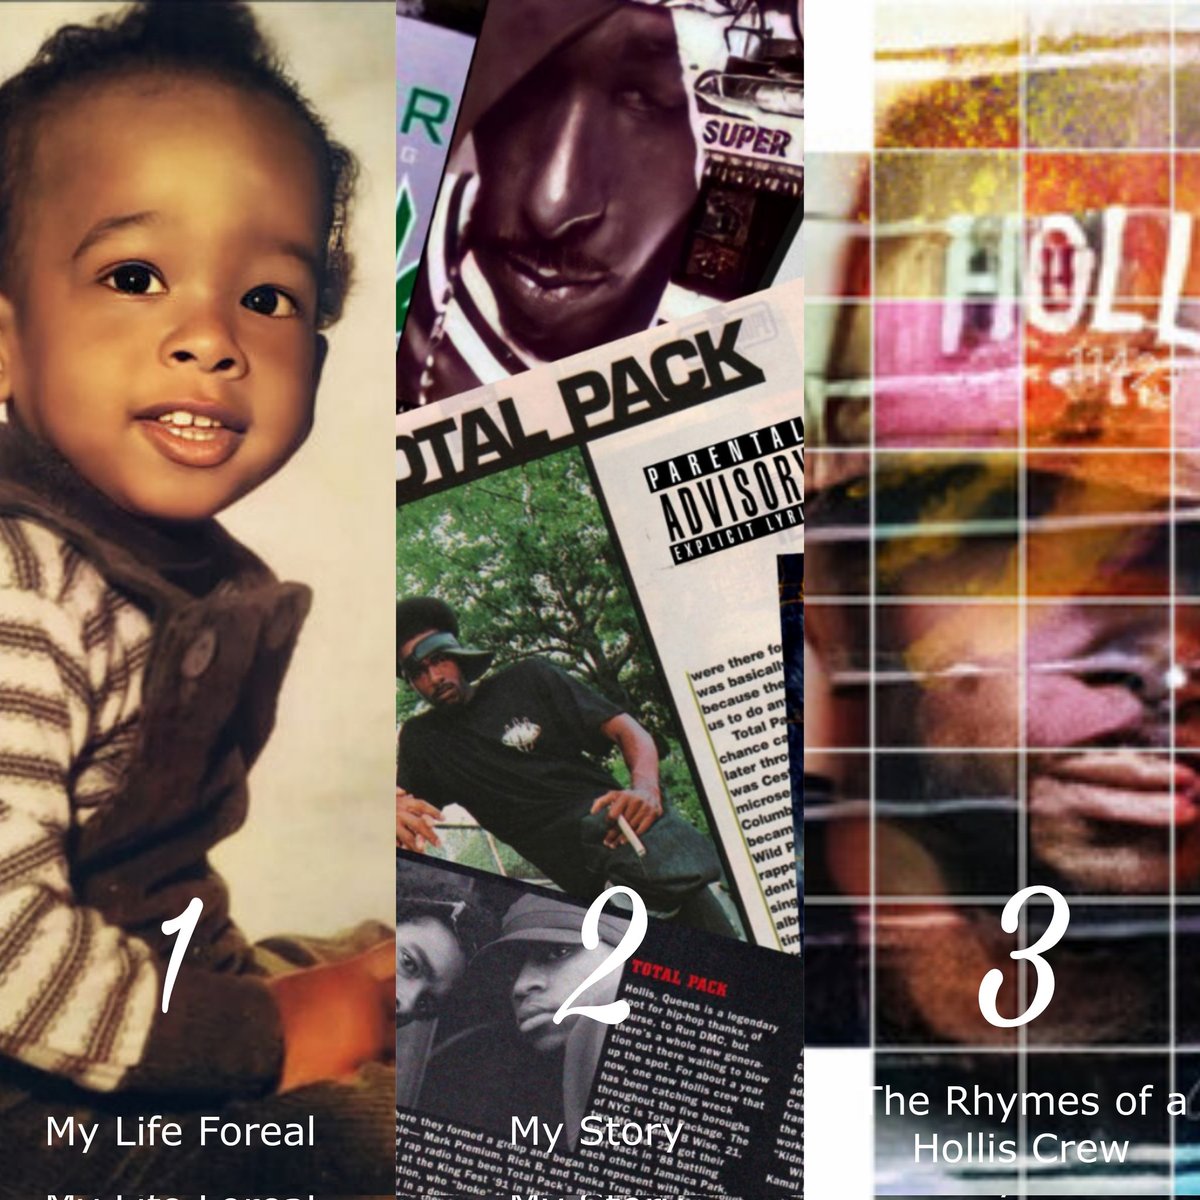 @lisamariehaden Experience all 3 of A TPMF Story albums by Corey Drumz on @bbmunlimited963/@symphonicdist #1 - My Life Foreal ffm.to/cdml4r #2 - My Story ffm.to/mstpmf #3 - The rhymes of a Hollis cew ffm.to/pmap2x Own the #ebook & #NFT linktr.ee/coreylbanks963